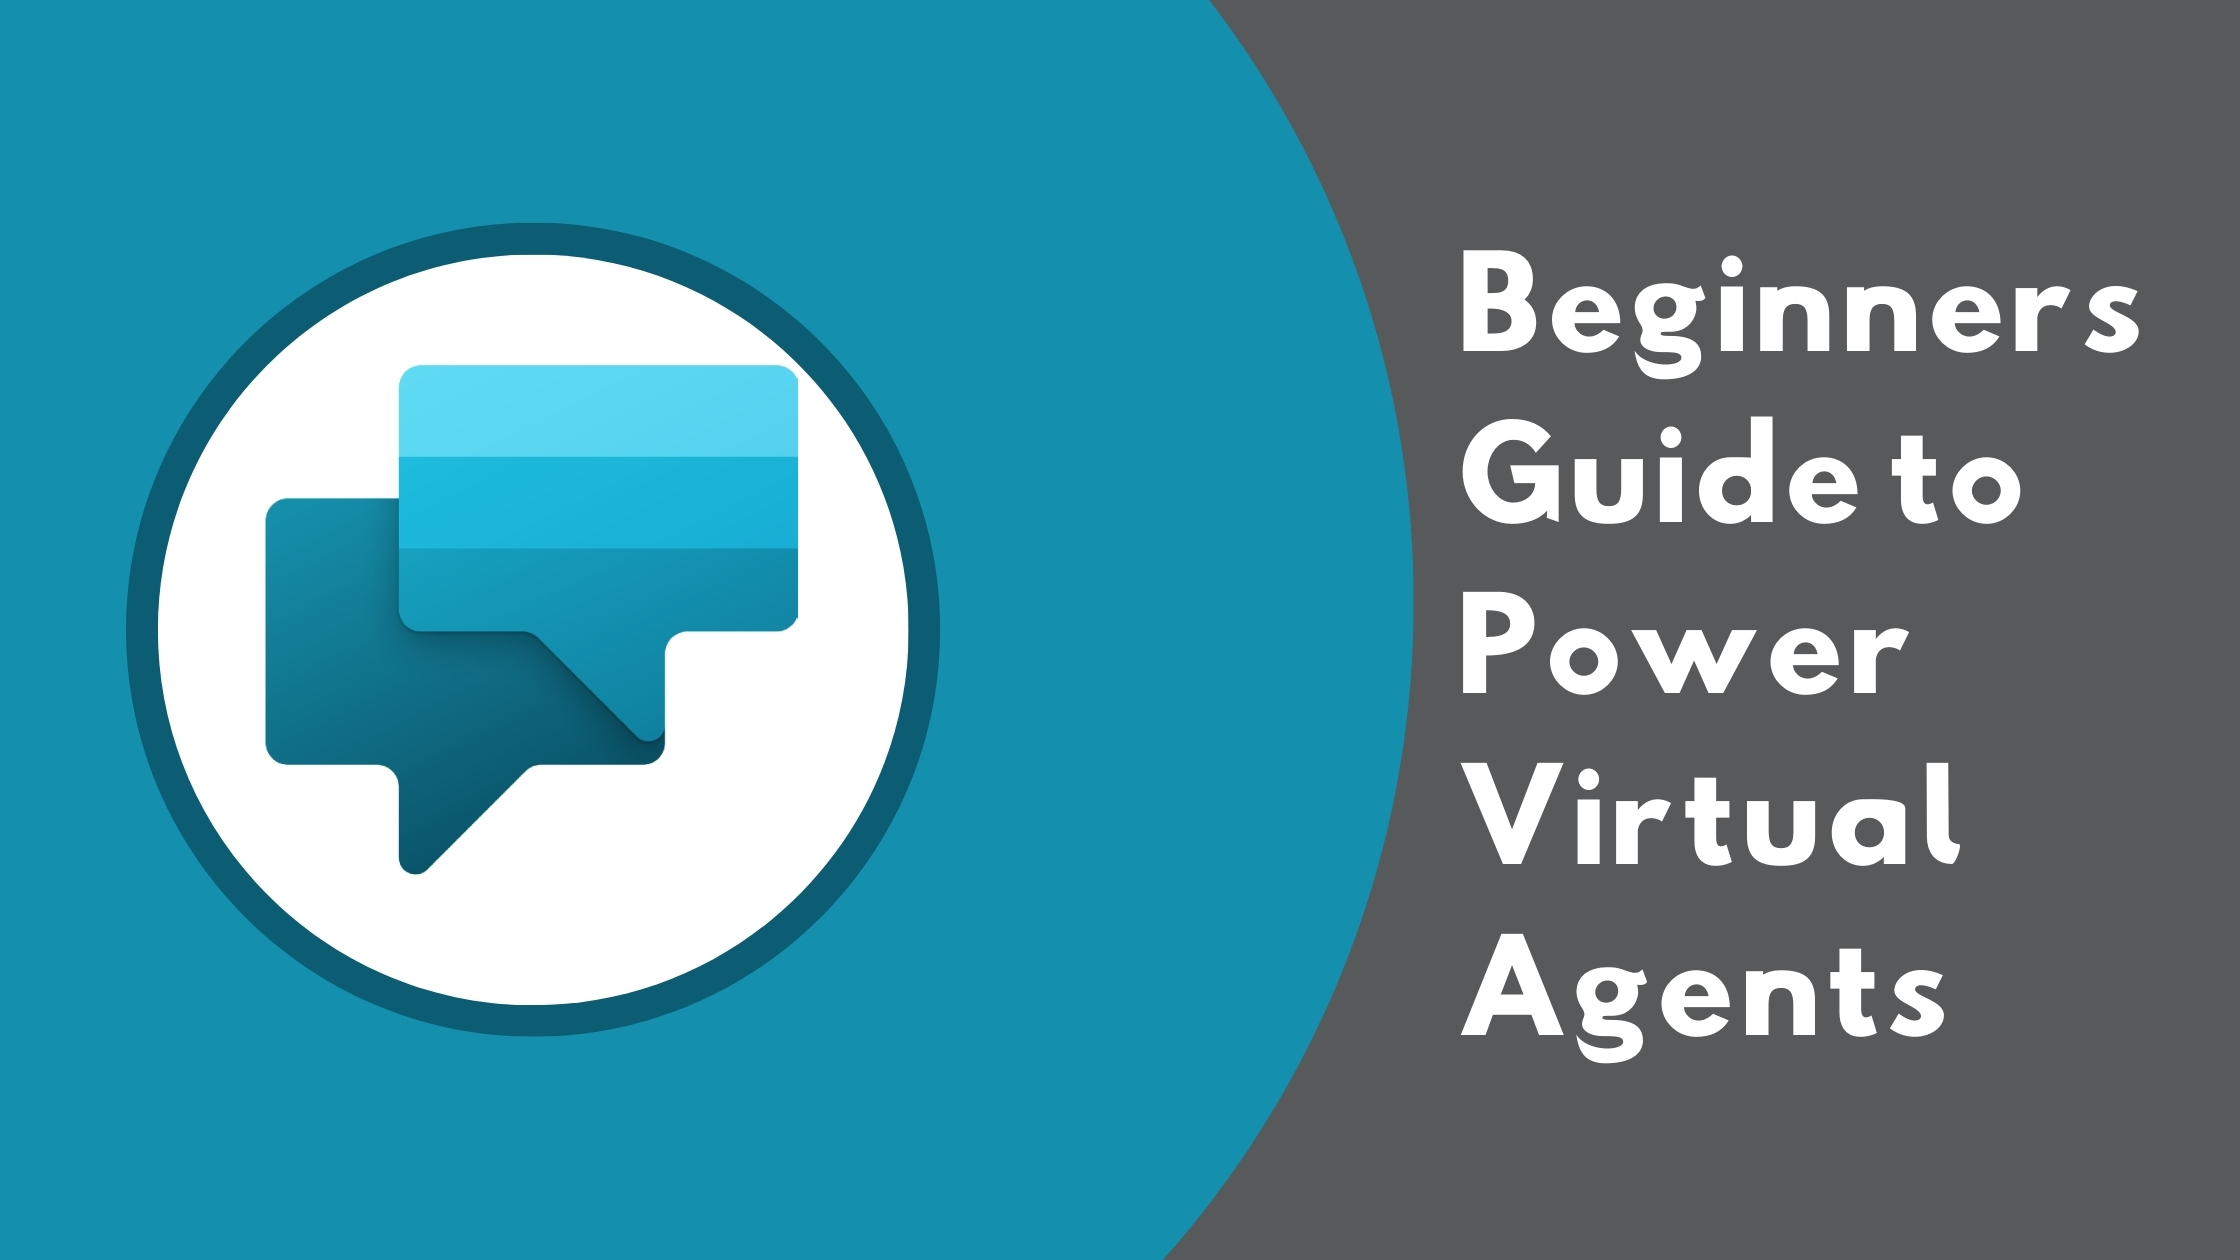 Beginners Guide to Power Virtual Agents